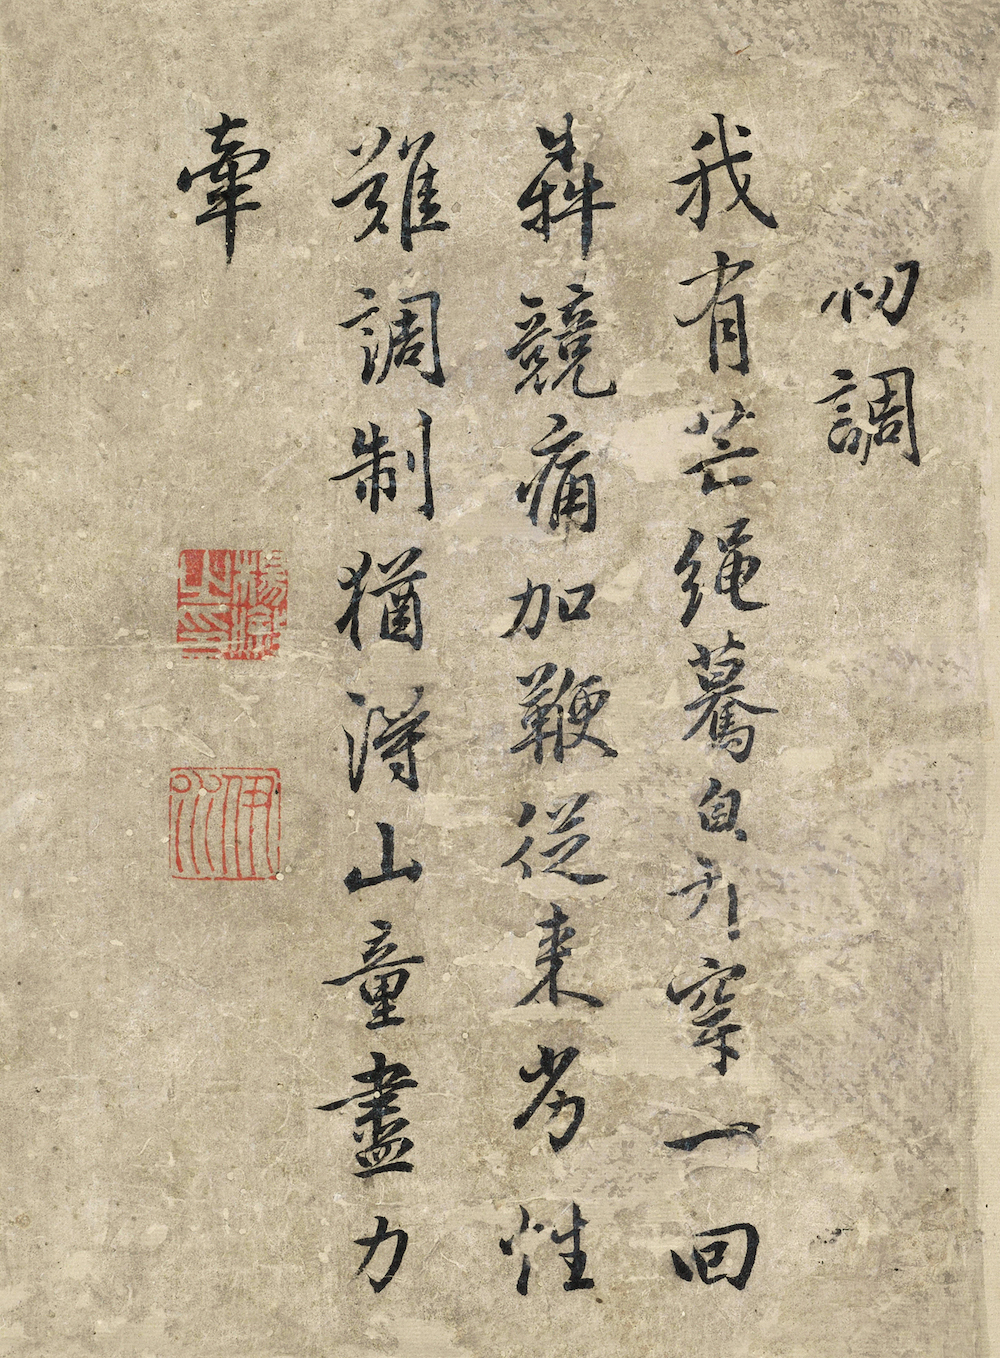 (Ming) Zhang Mu's Cattle Atlas, Preliminary Adjustment, color on paper, vertical 23.7 cm, horizontal 17.7 cm, donated by Mr. Yang Quan, collected by Guangzhou Art Museum